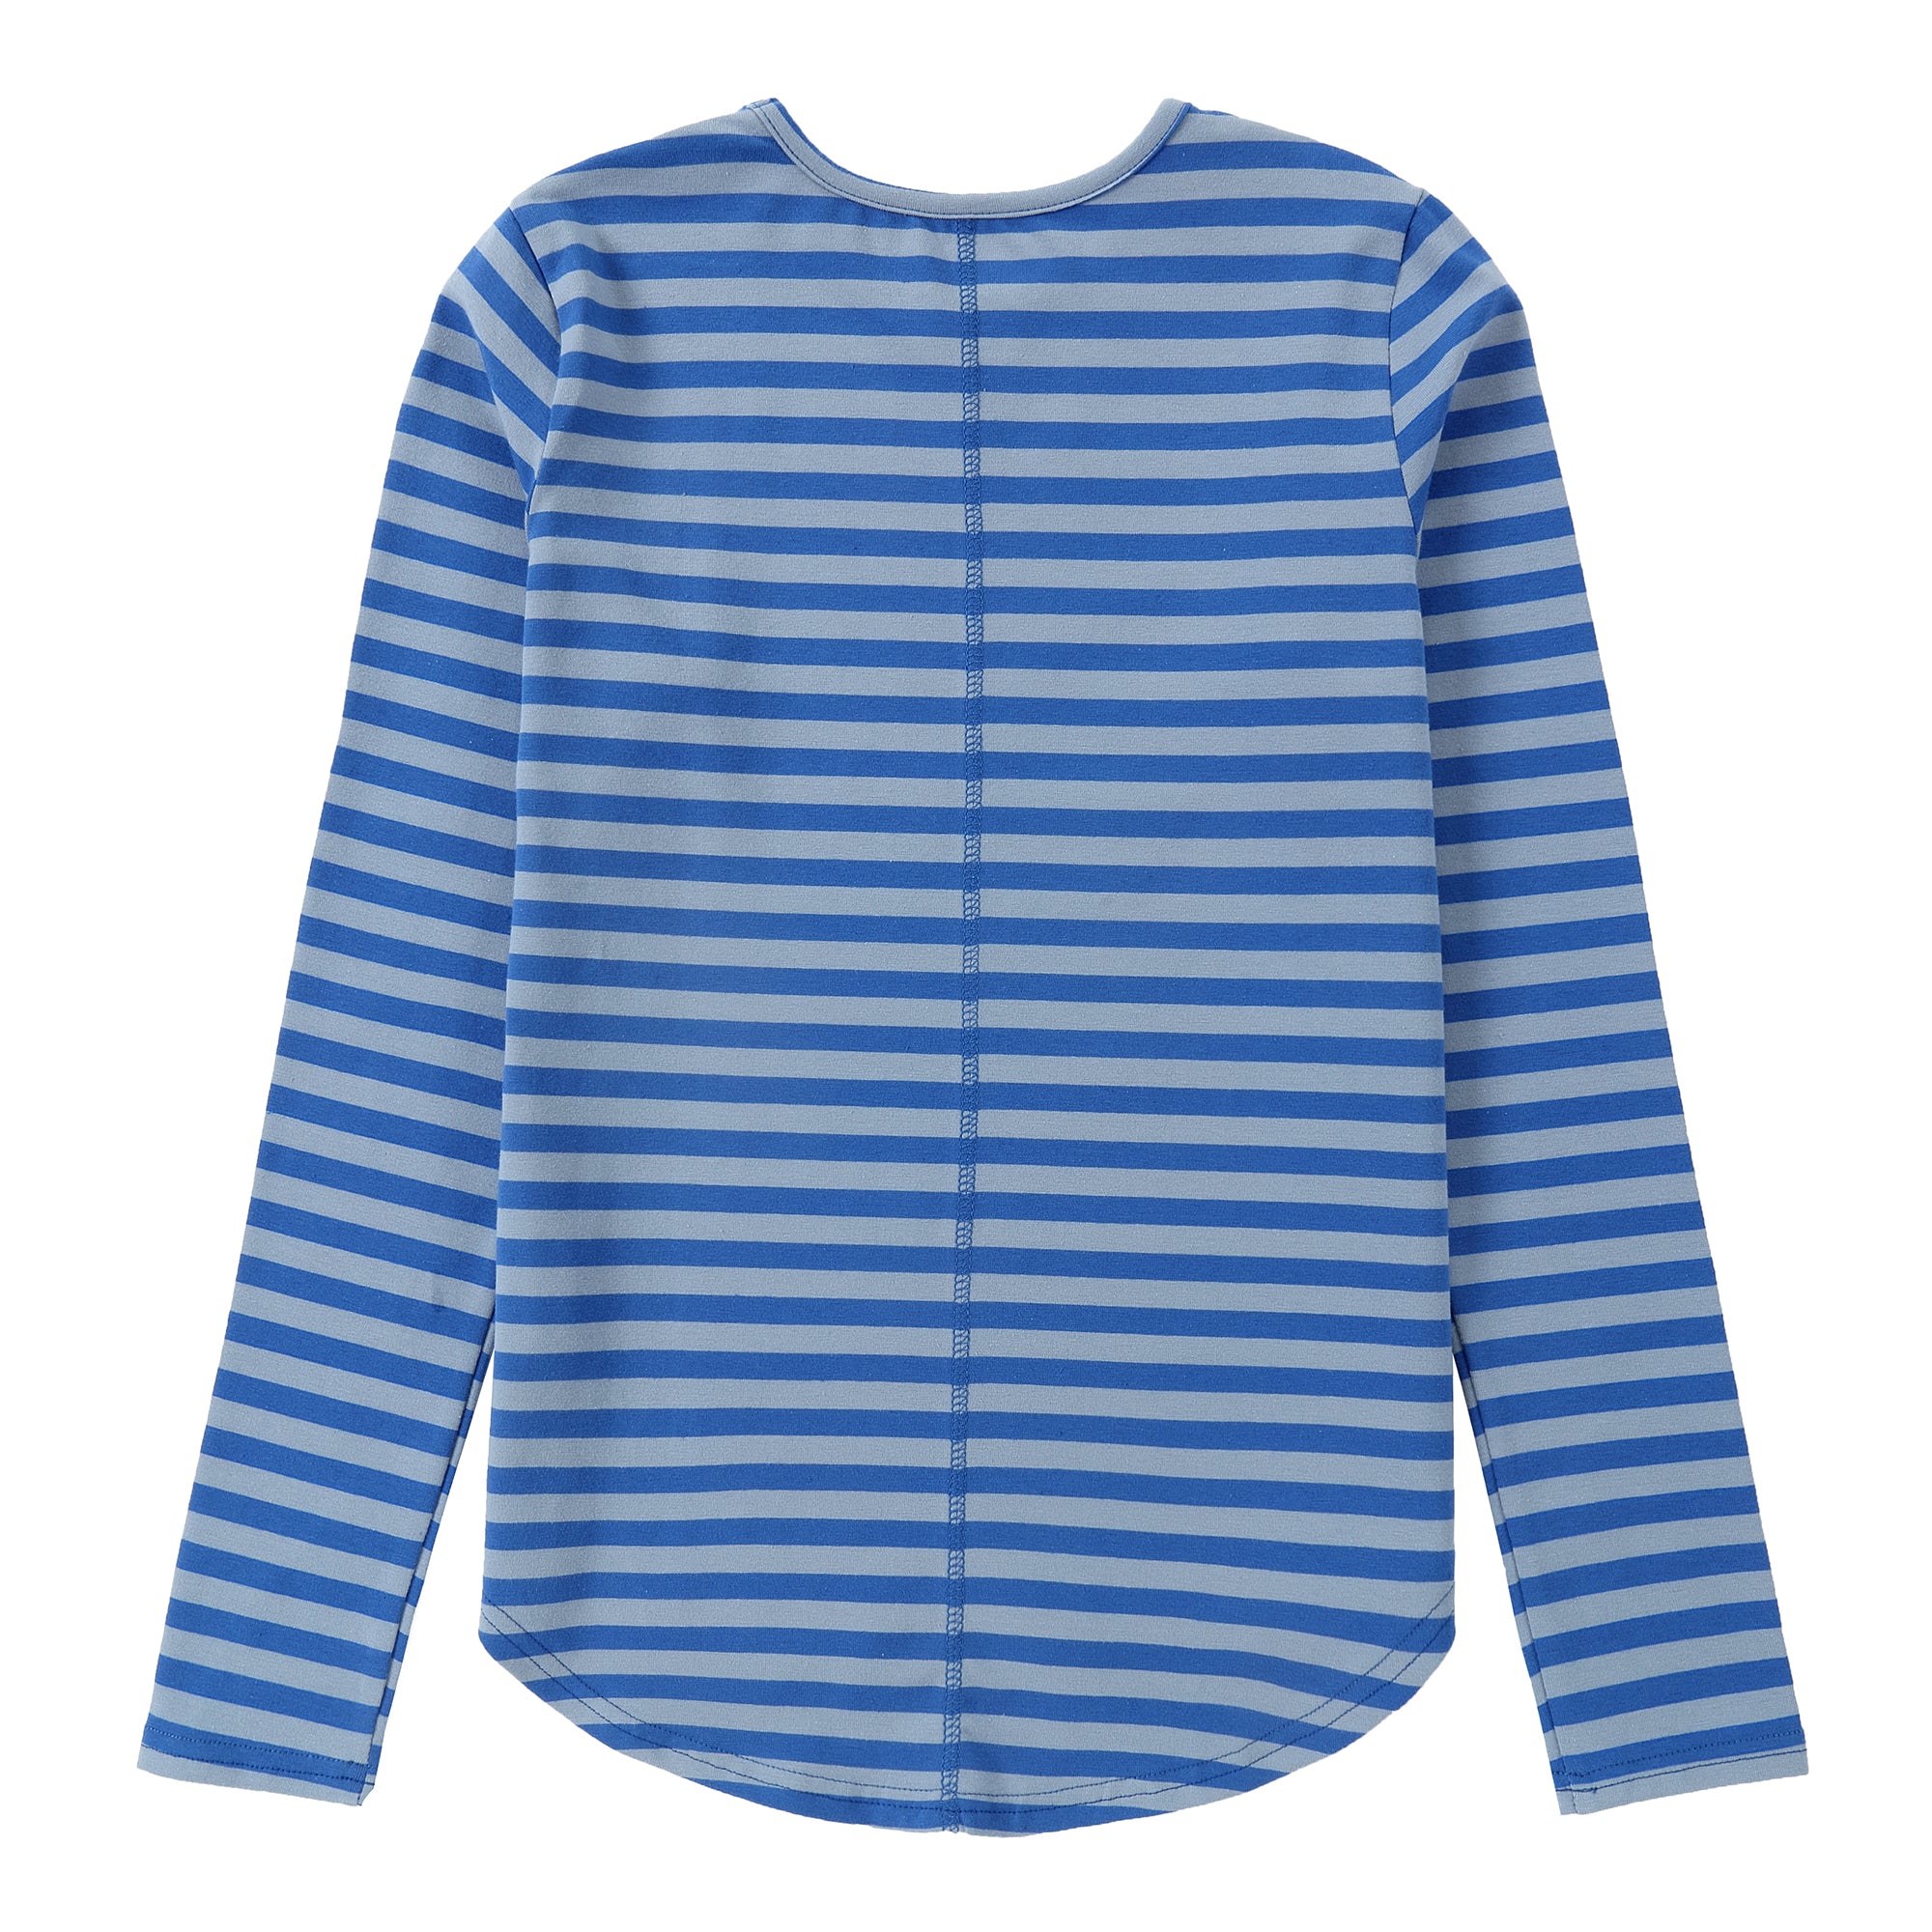 Blue and Grey Striped T-Shirt